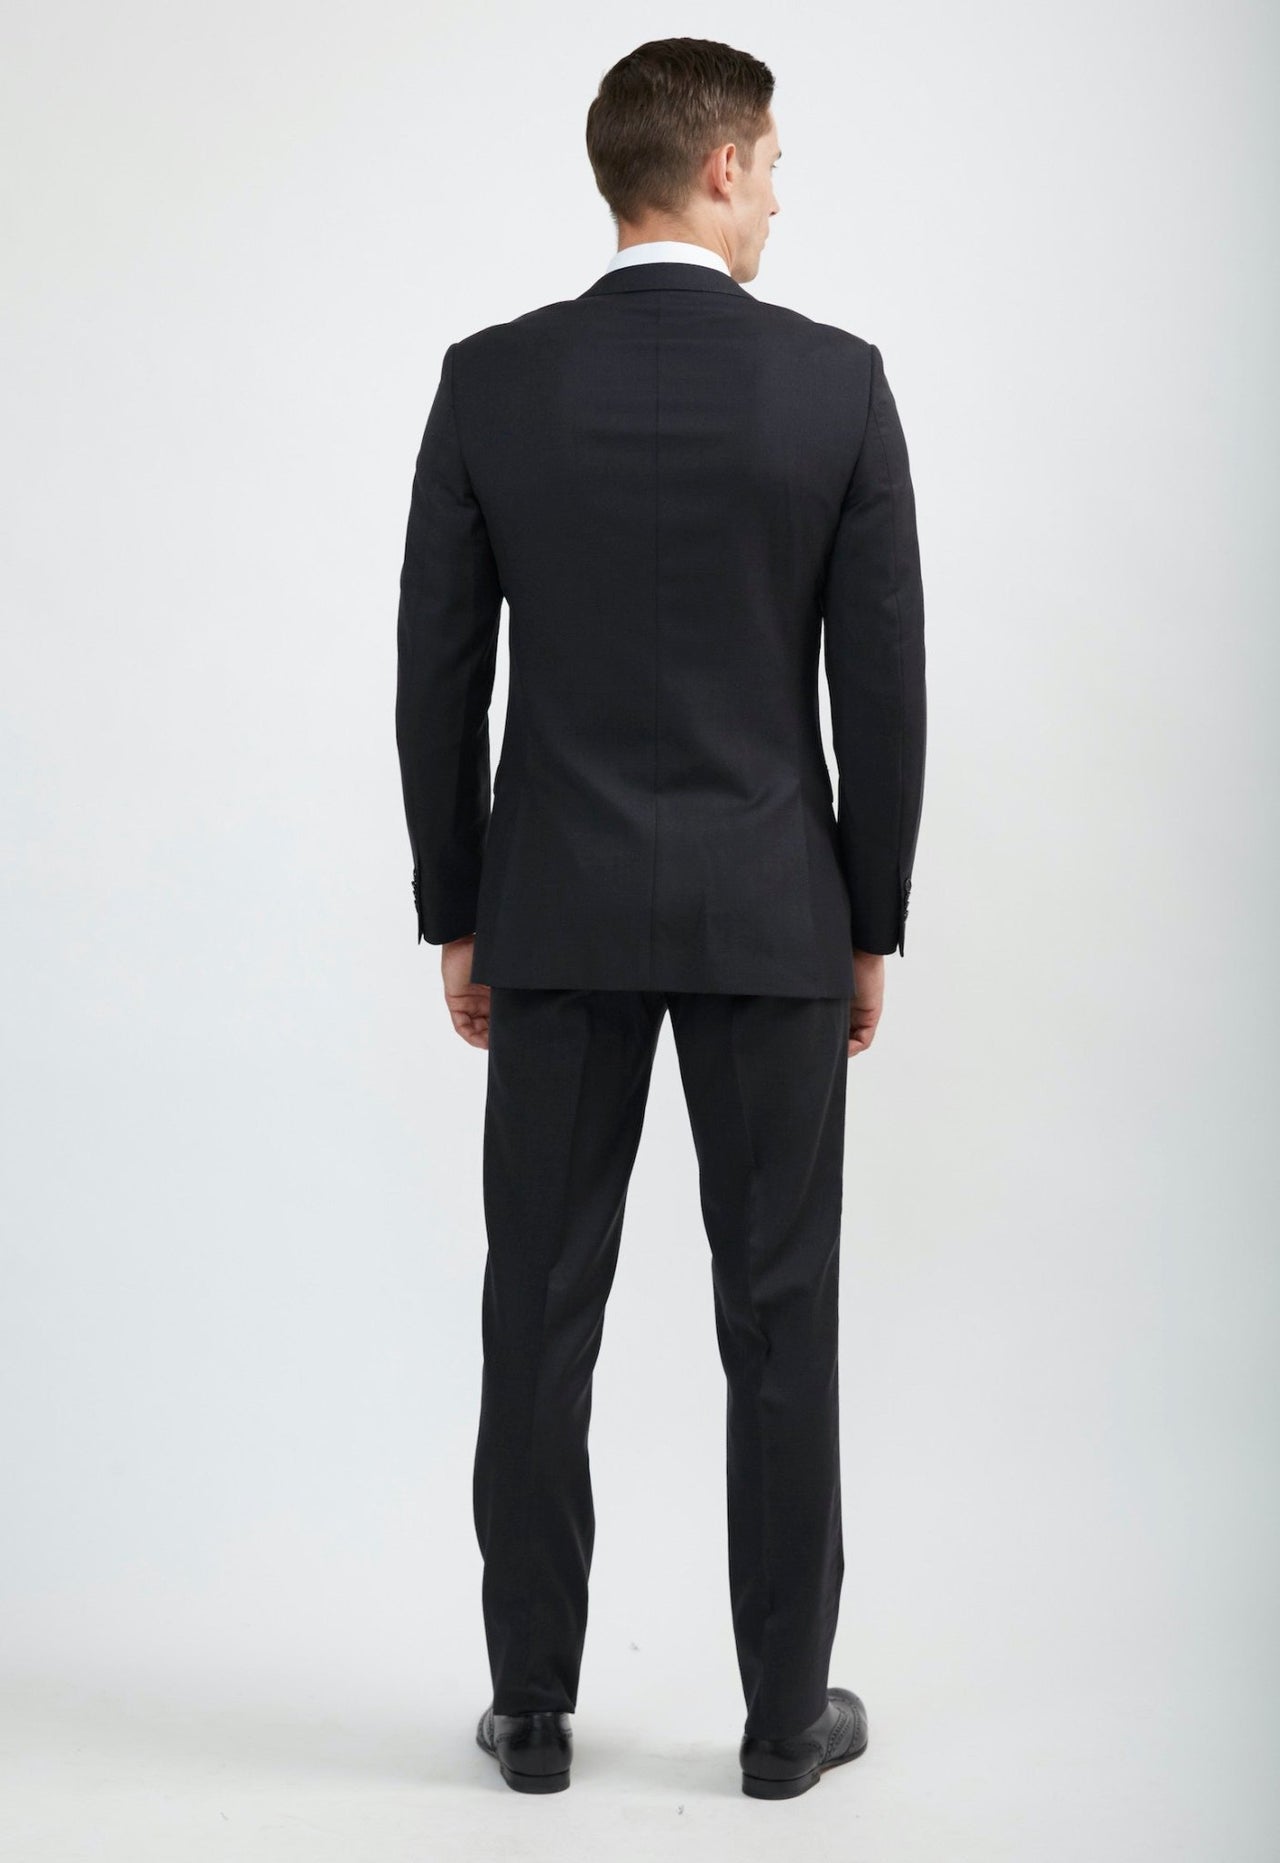 Arezzo Collection - 100% Wool Suit Modern Fit Italian Style 3 Piece in |  Suits Outlets Men's Fashion